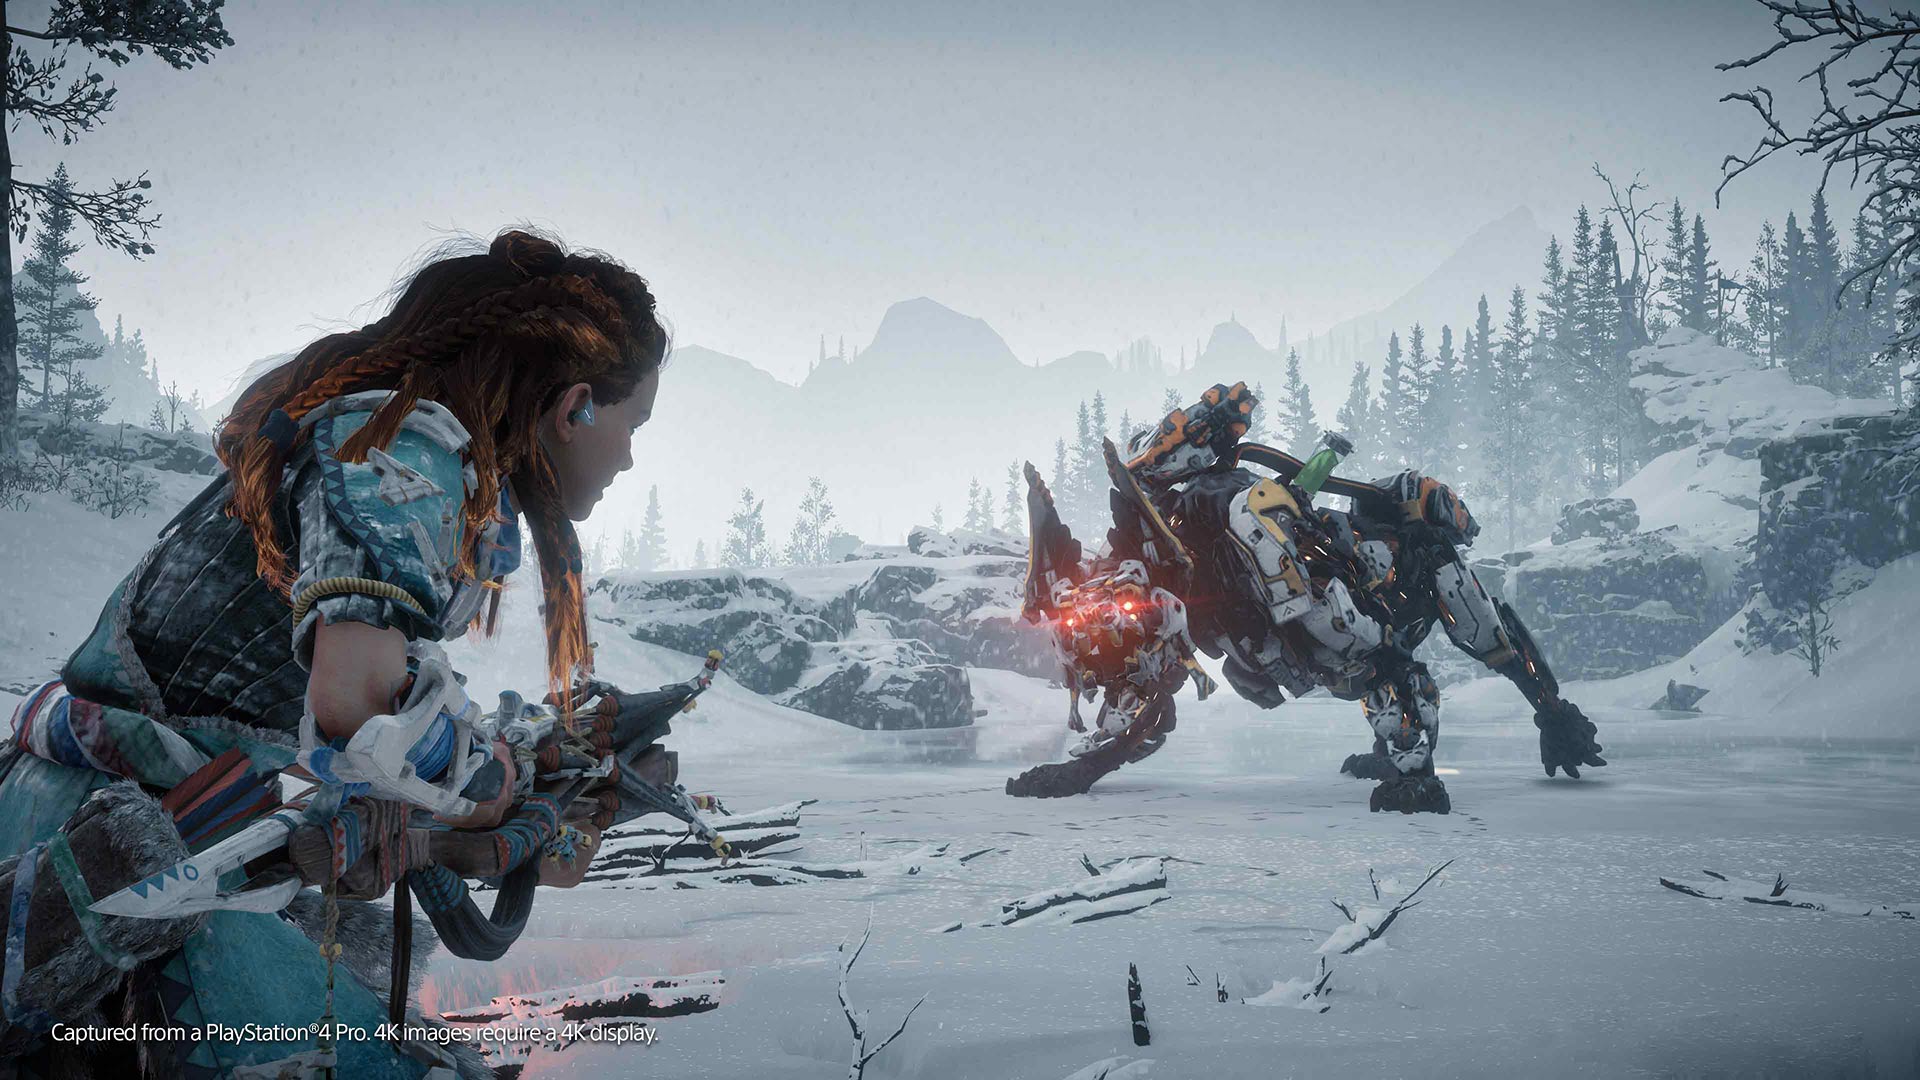 DLC for Horizon Zero Dawn: Complete Edition PS4 — buy online and